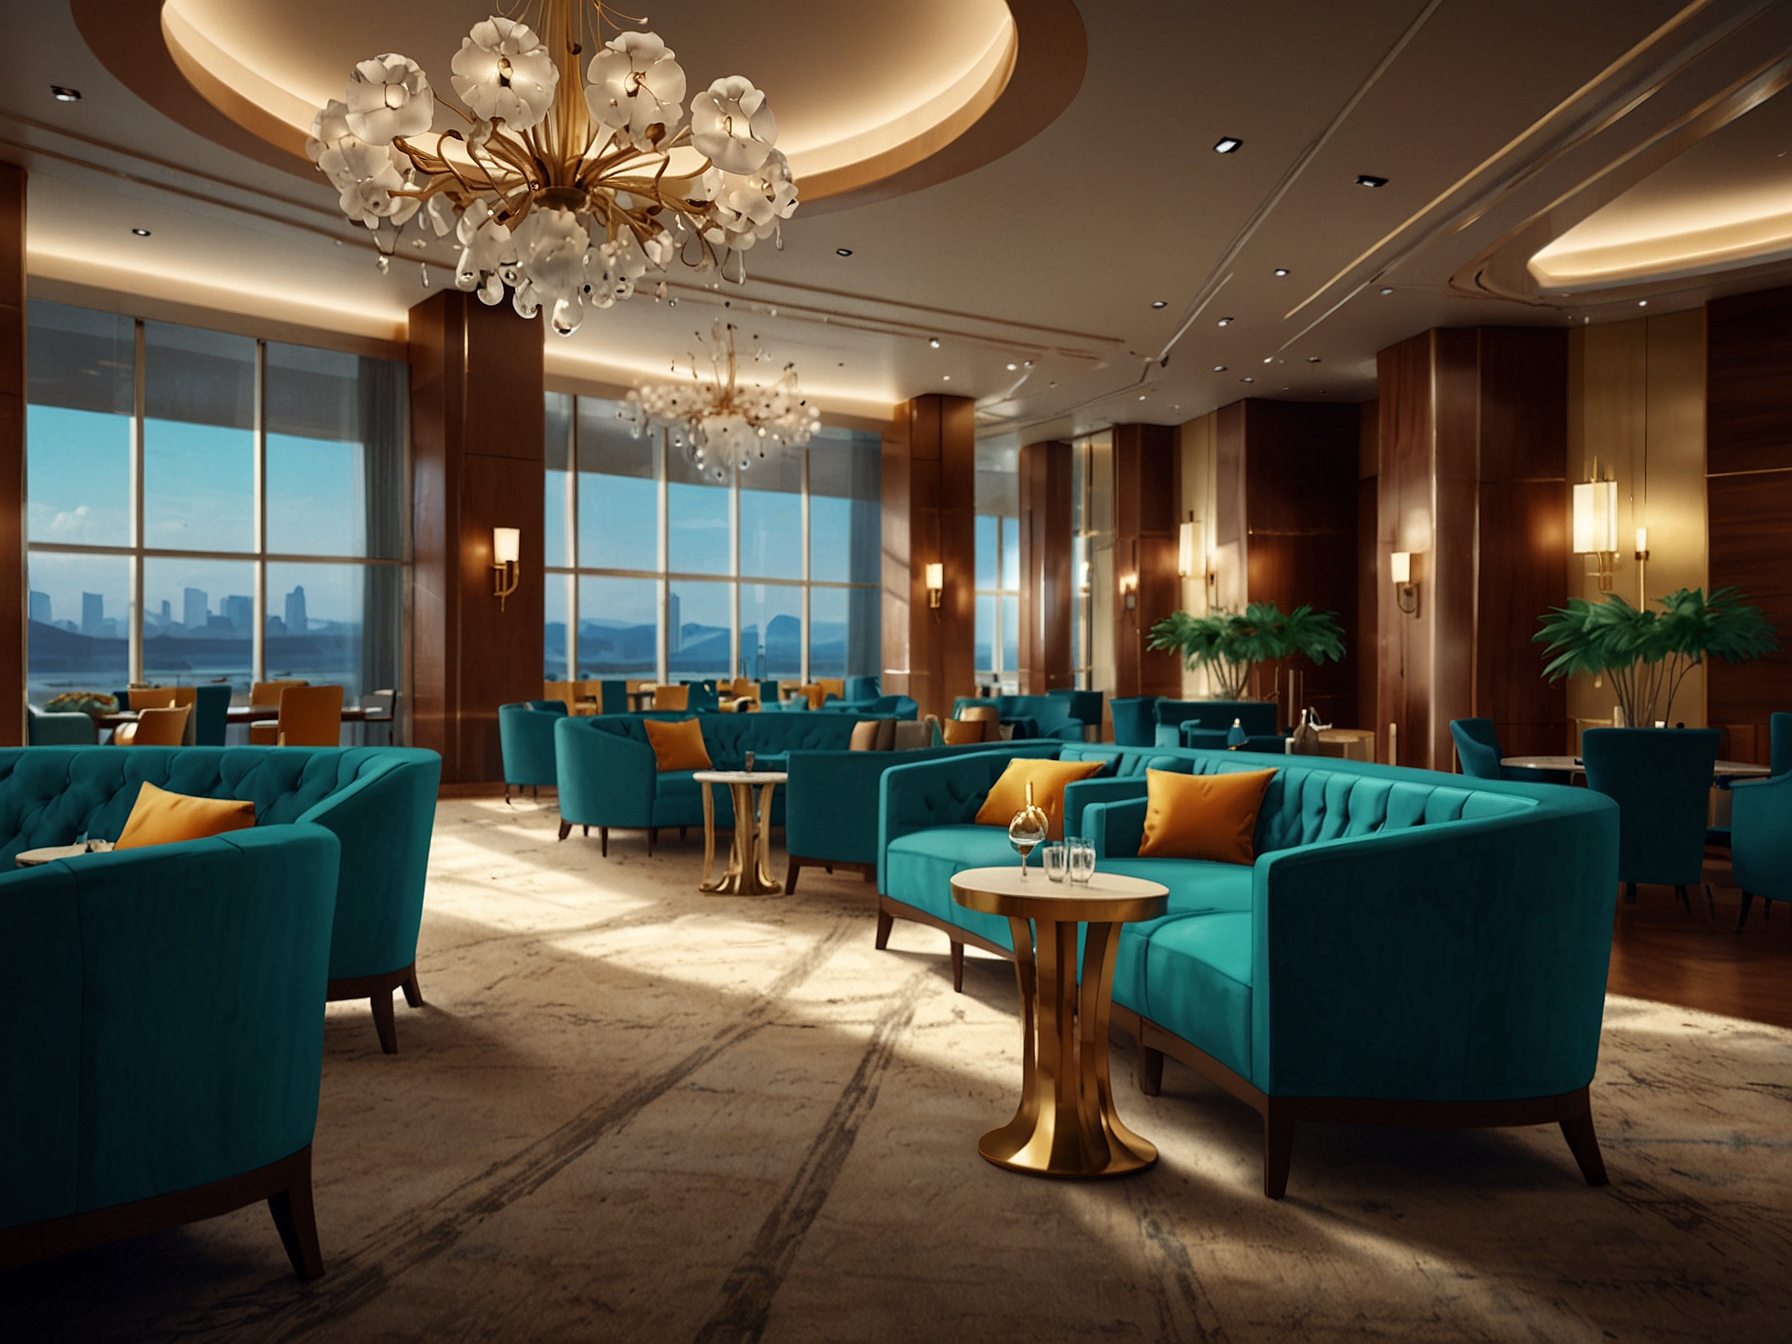 A luxurious airport lounge featuring plush seating, elegant decor, and a gourmet dining area, showcasing the opulence and comfort provided to premium travelers.